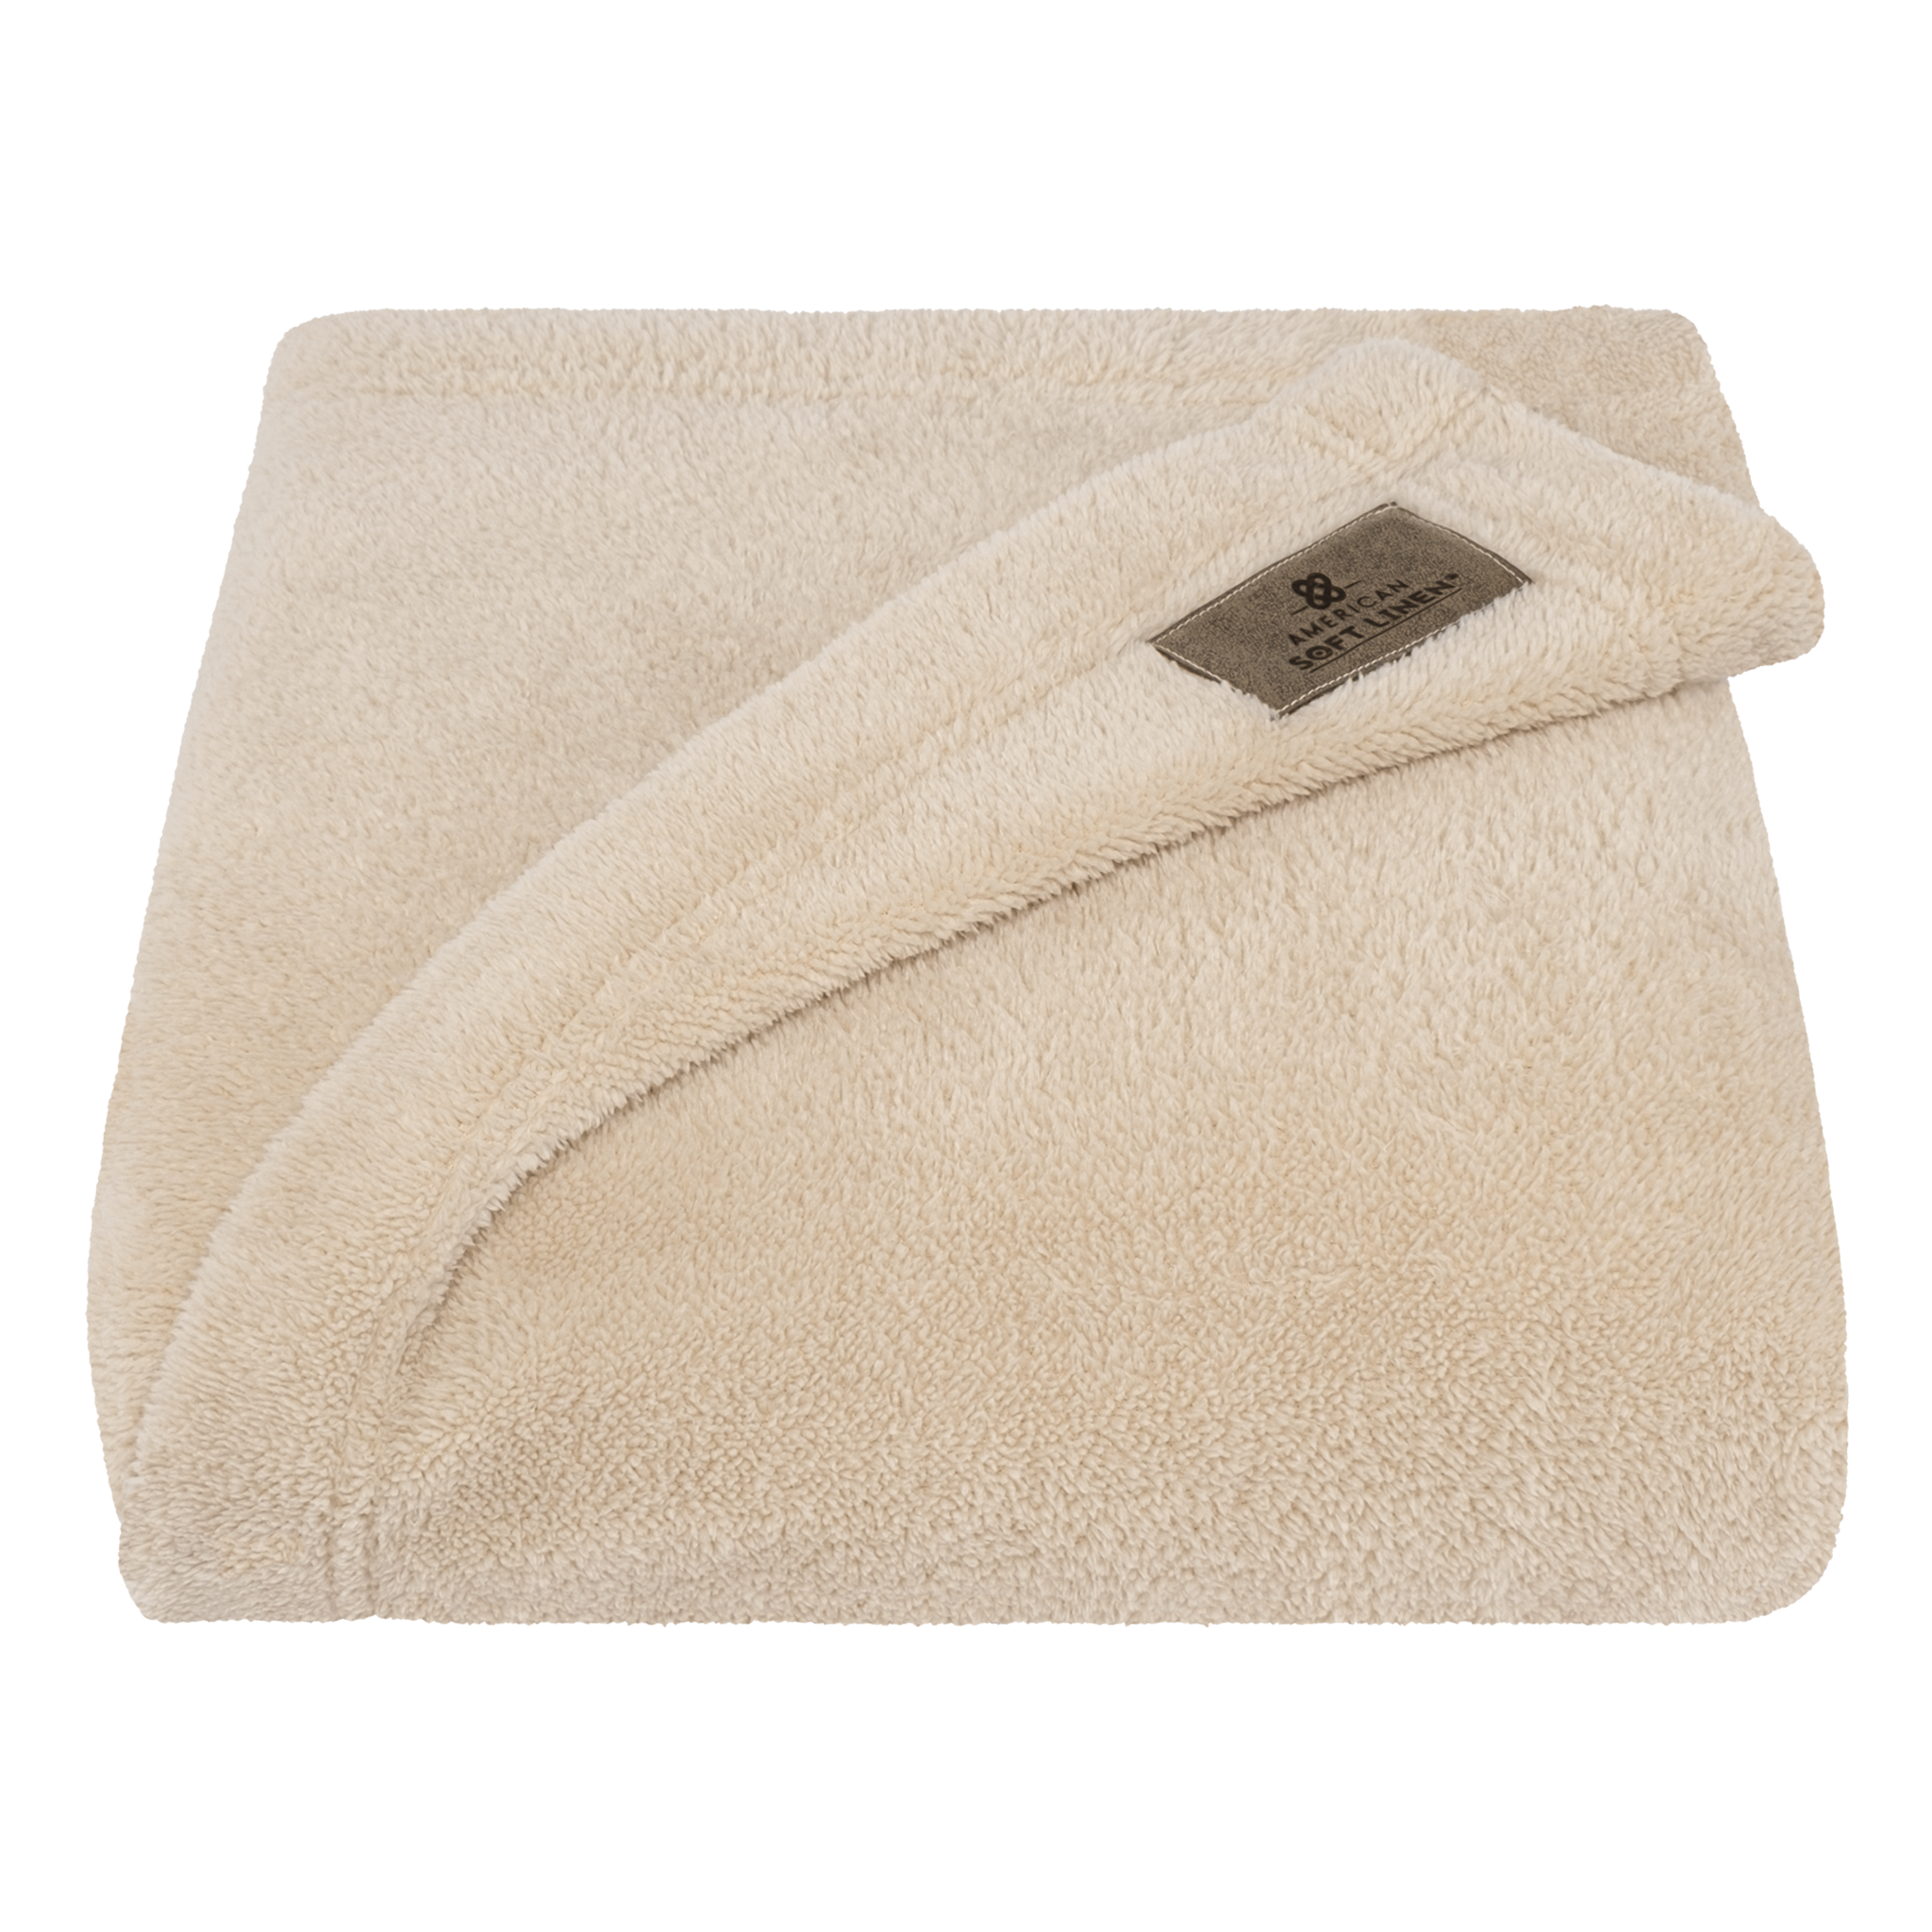 American Soft Linen - Bedding Fleece Blanket - Wholesale - 24 Set Case Pack - Throw Size 50x60 inches - Sand-Taupe - 3